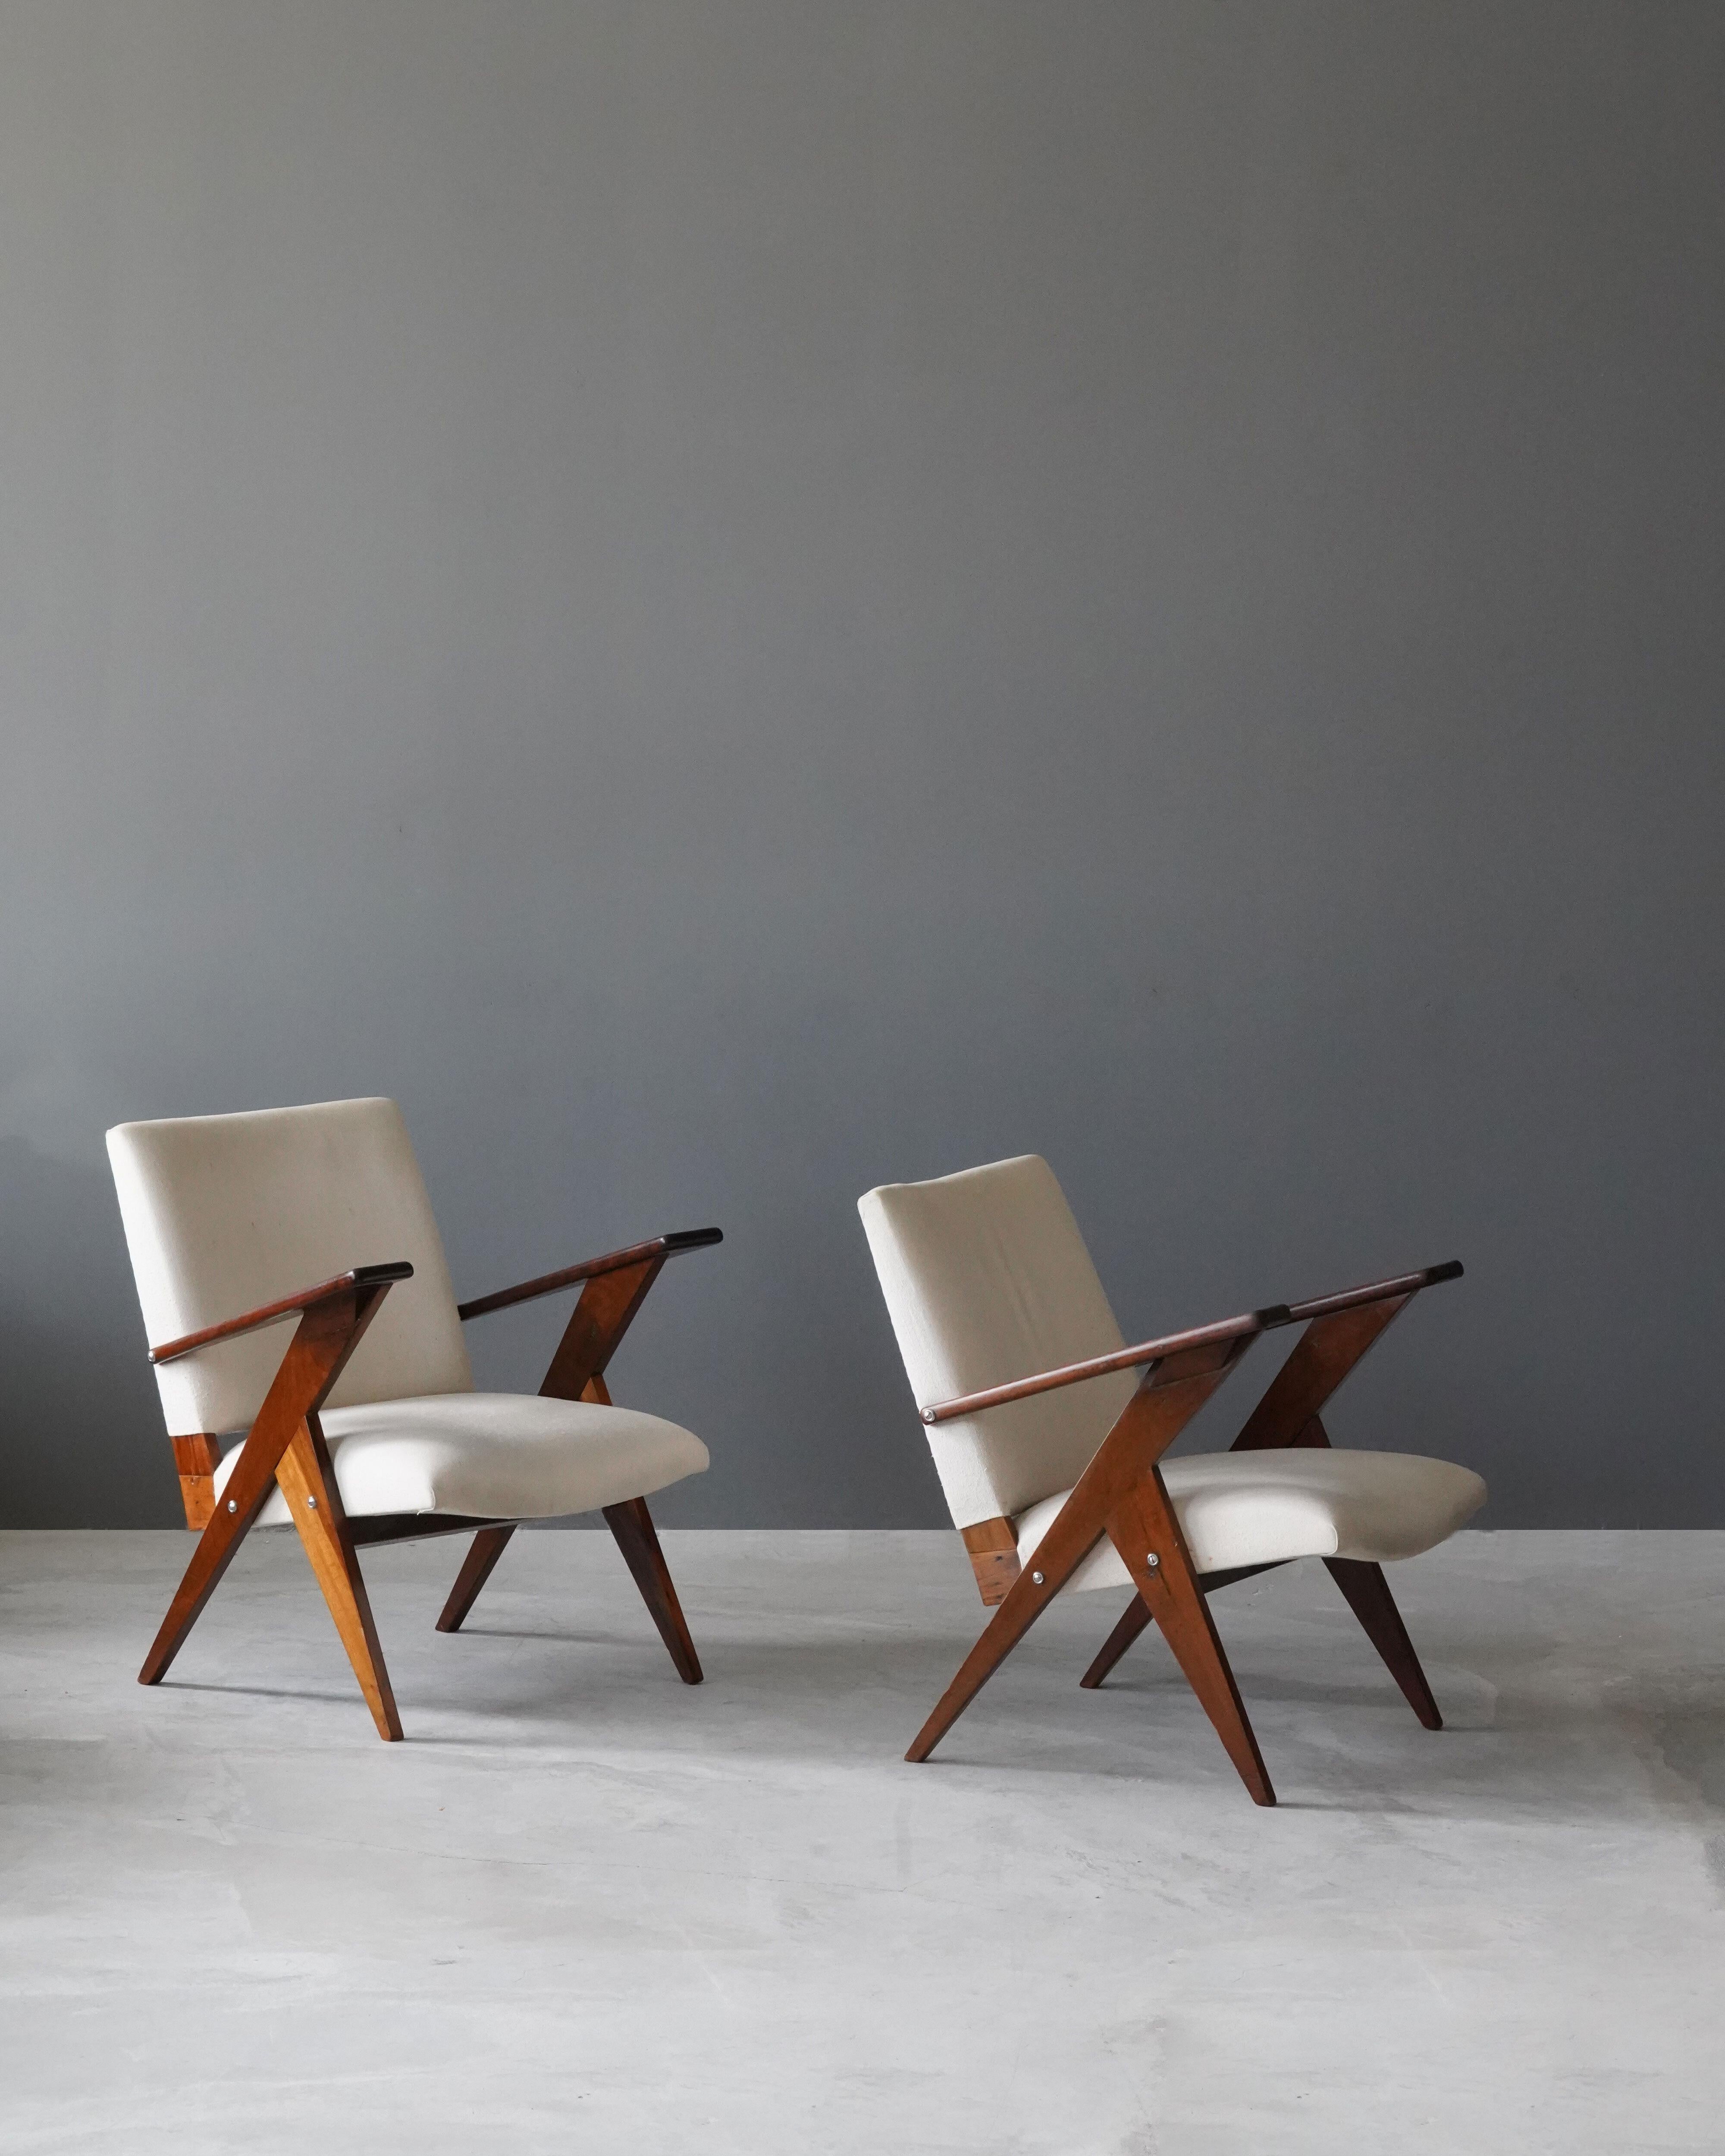 A pair of lounge chairs / armchairs. Designed by José Zanine Caldas, produced by Mòveis Artisticos Z, Brazil, 1950s.

In Imbuia wood, in white fabric. 

Other designers of the period include Joaquim Tenreiro, Jorge Zalszupin, Luis Barragan,